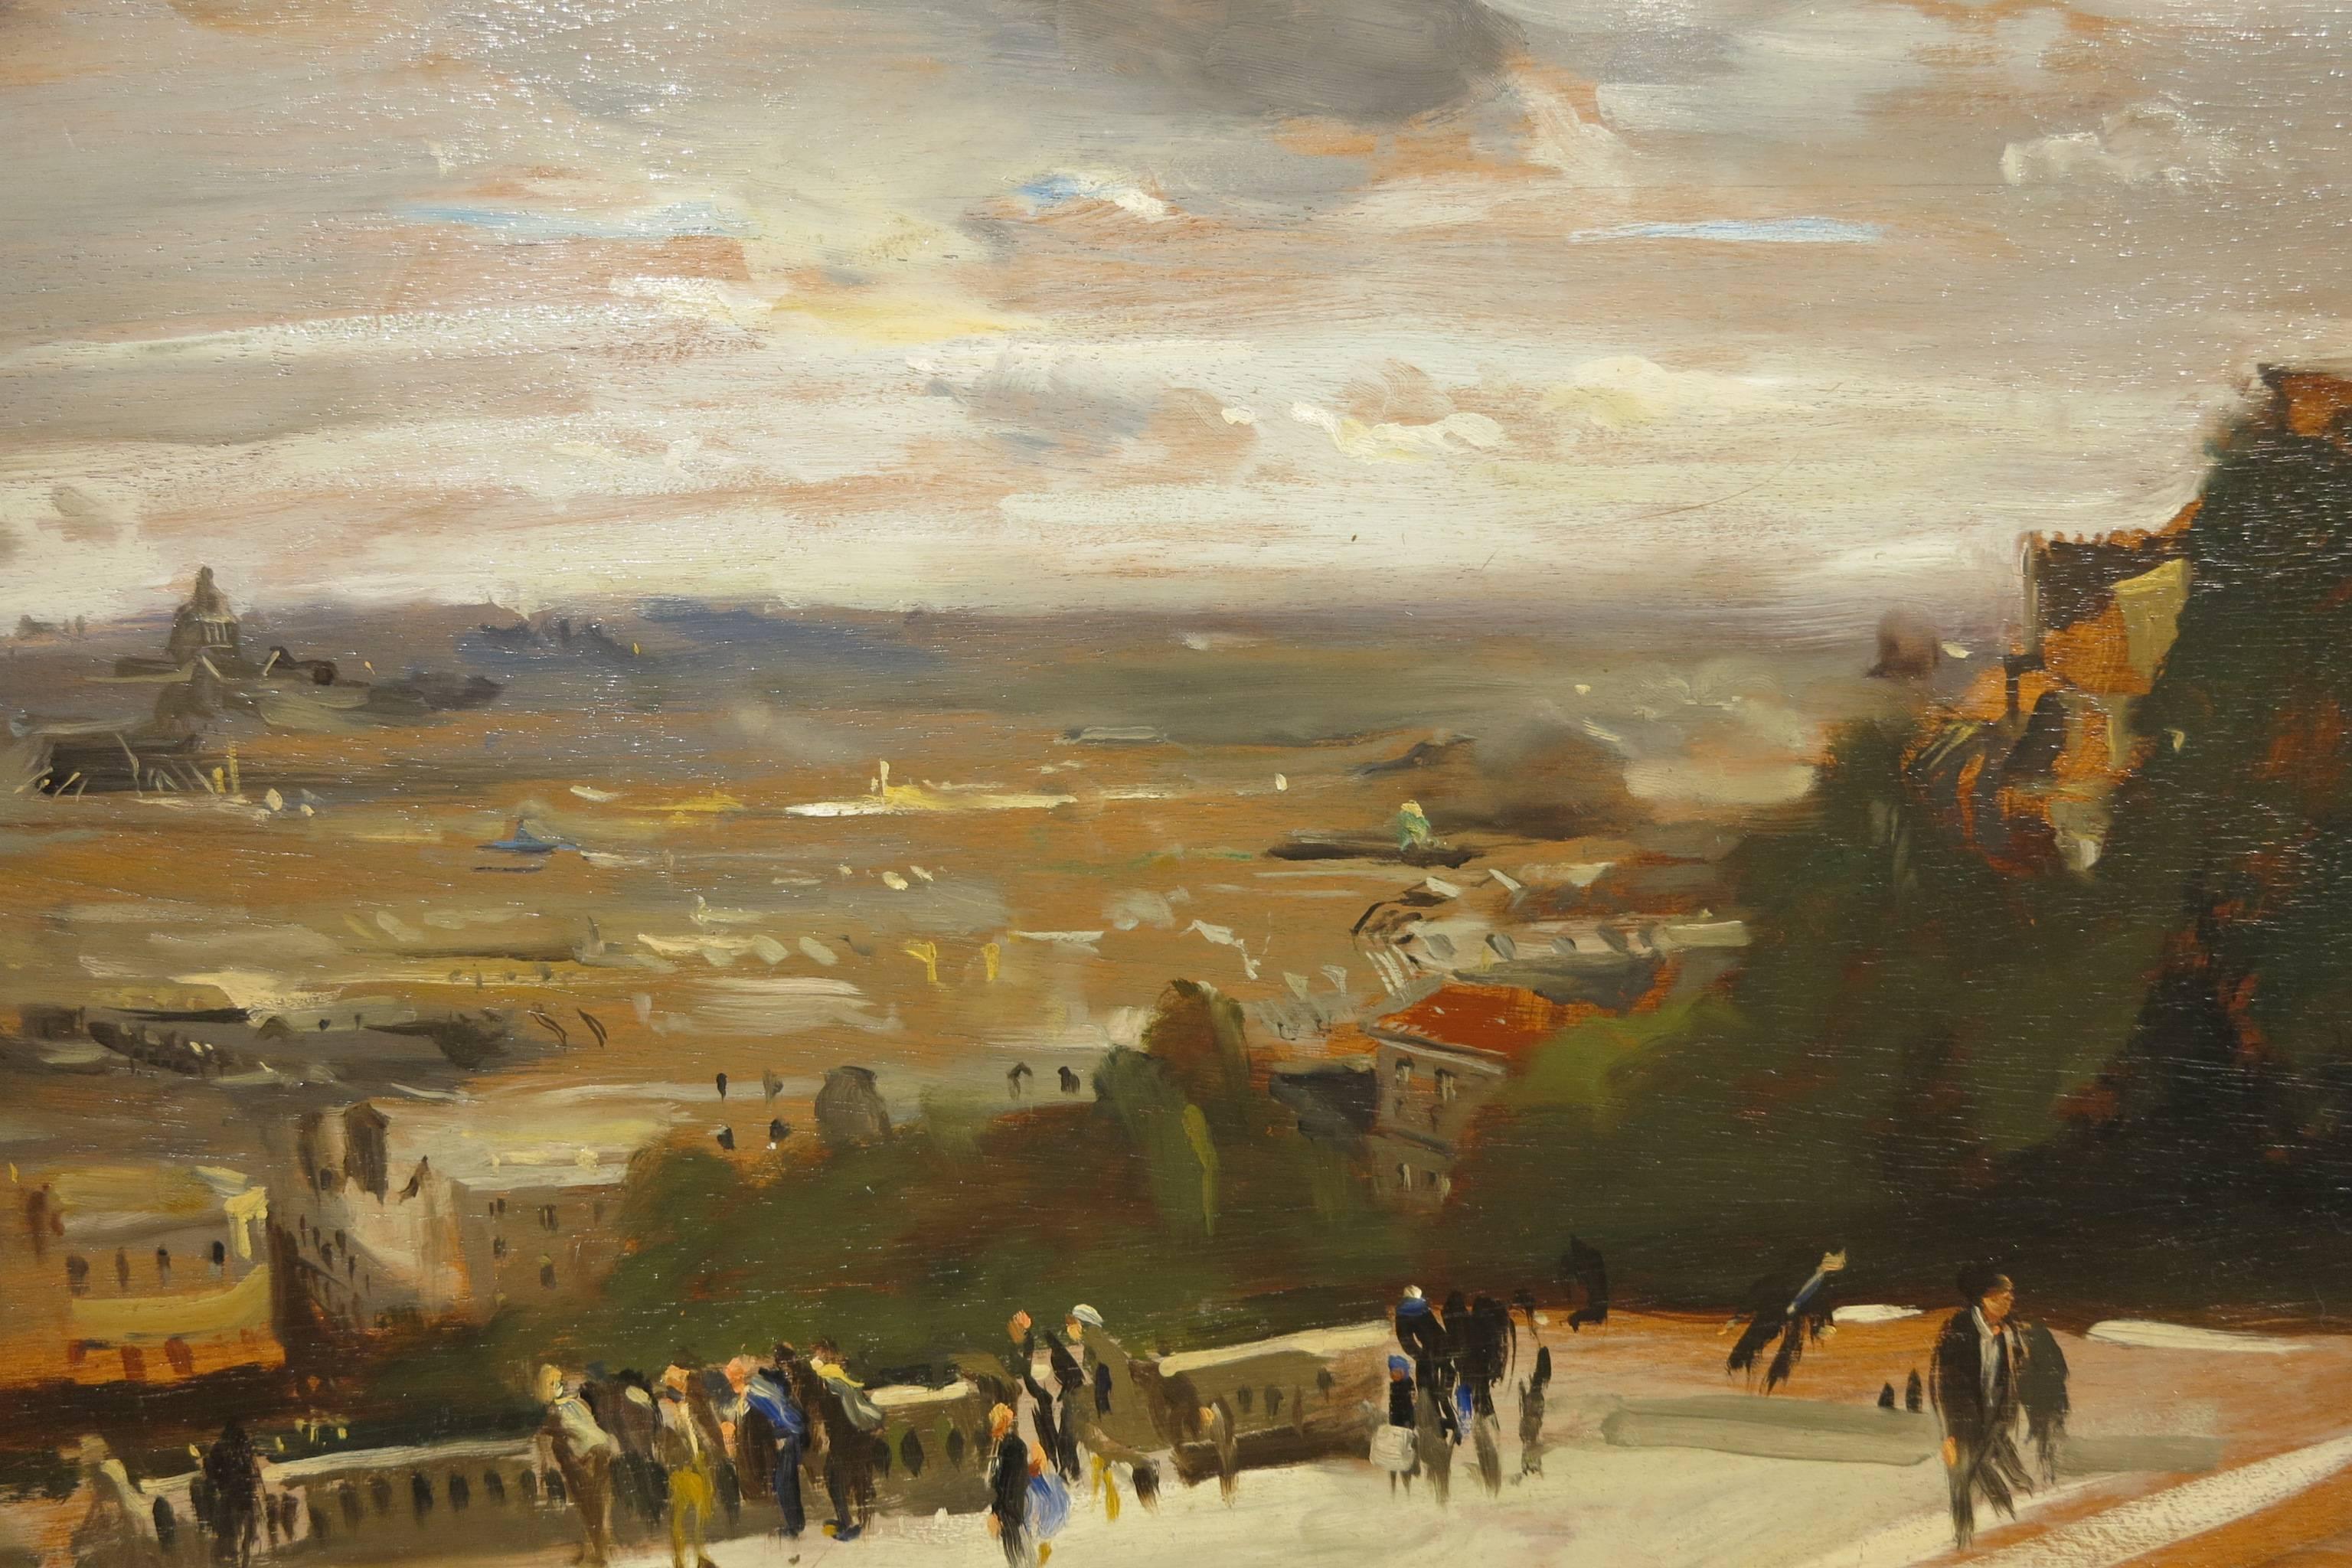 View from Sacre Coeur - Painting by David Levine